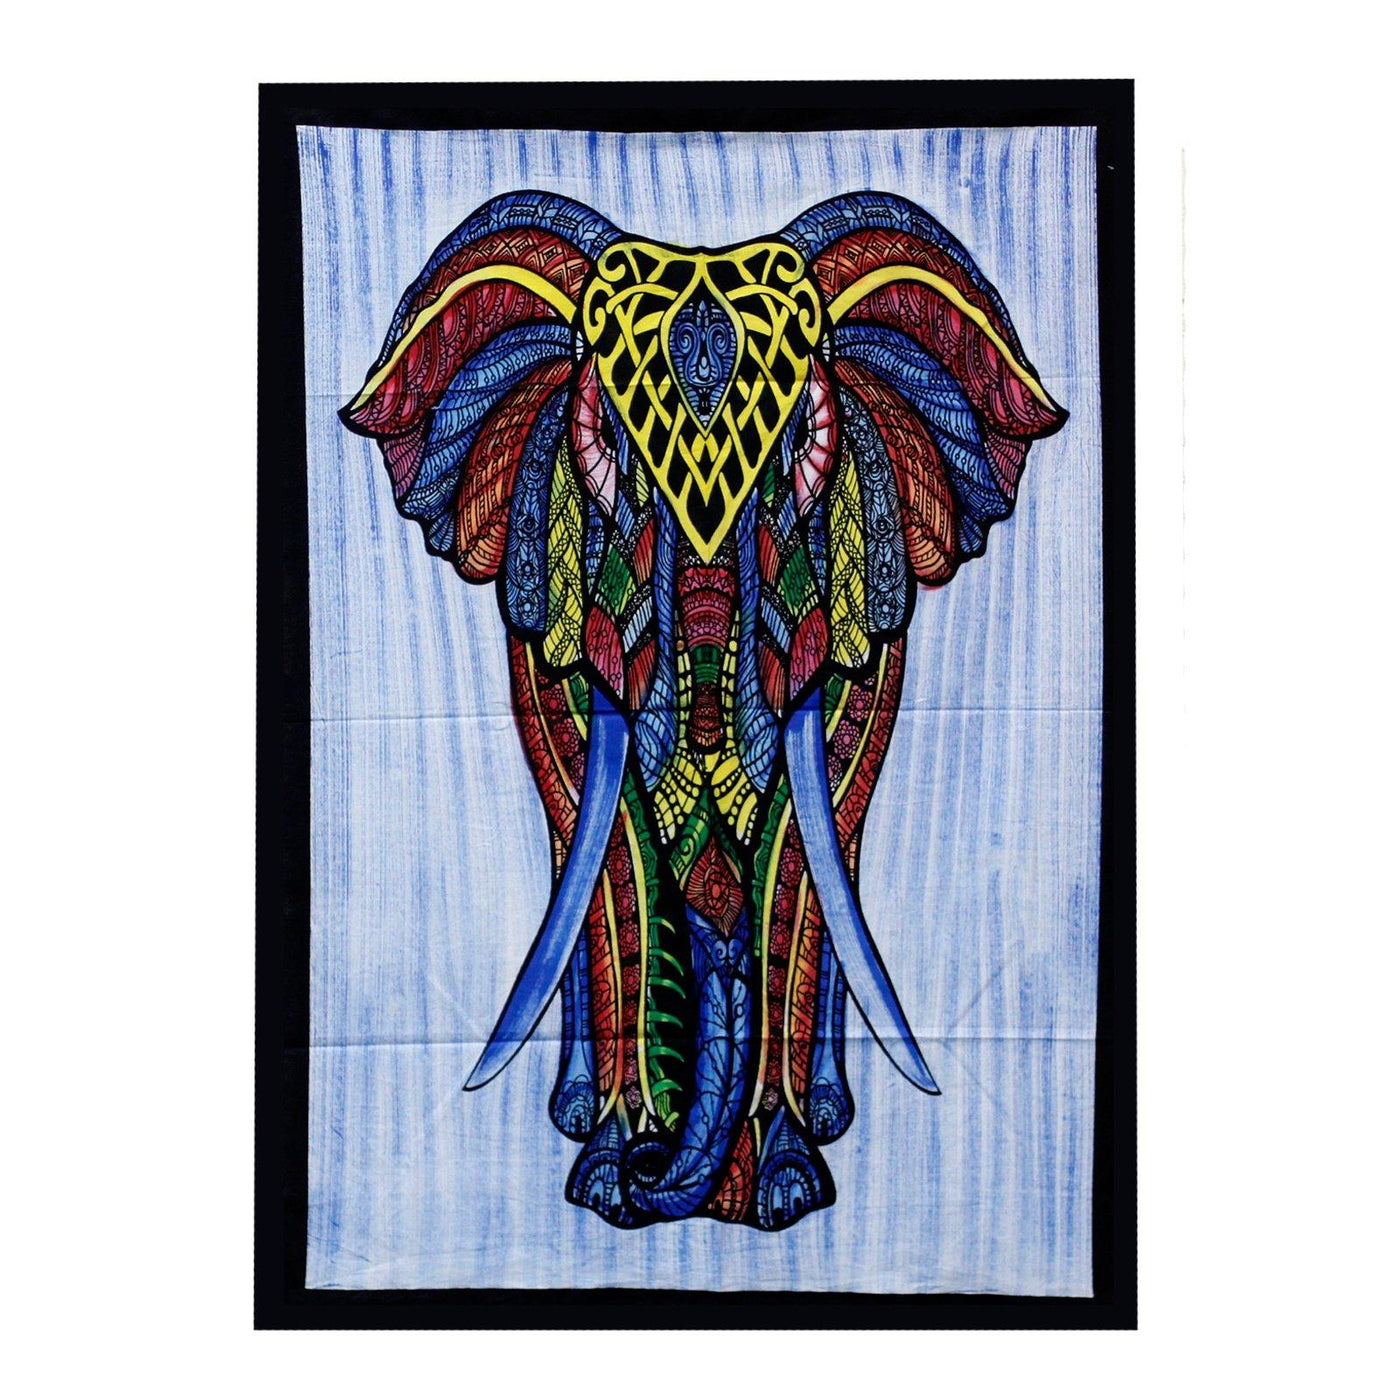 Hand-brushed Cotton Wall Hangings Tapestry, Elephant Design.